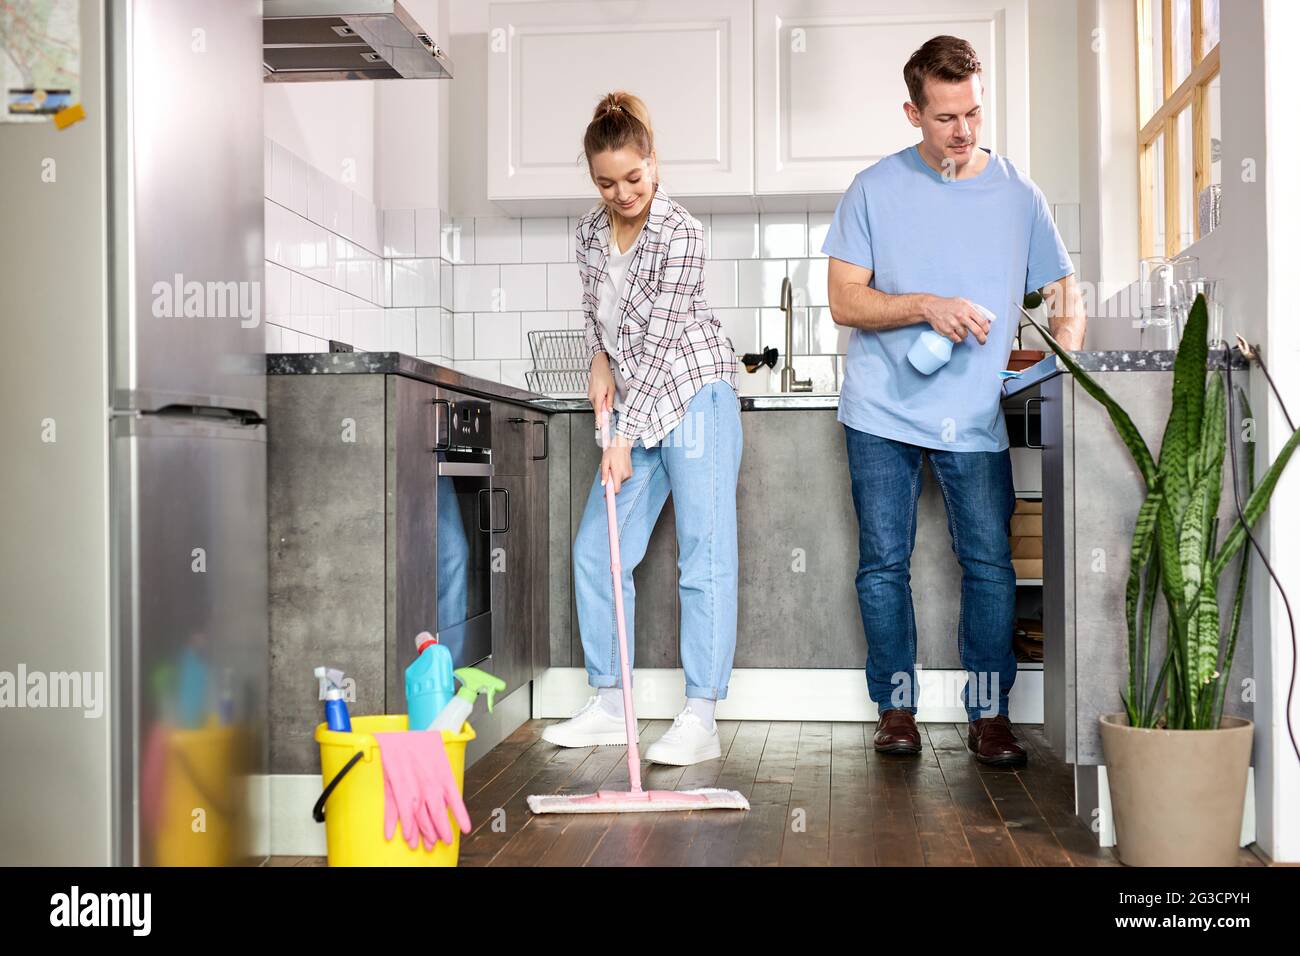 Two Janitors Cleaning Kitchen And Mopping Floor At Home, Caucasian Man And Woman In Casual Weae Enjoy Housekeeping, Cleaning Flat Apartment Stock Photo